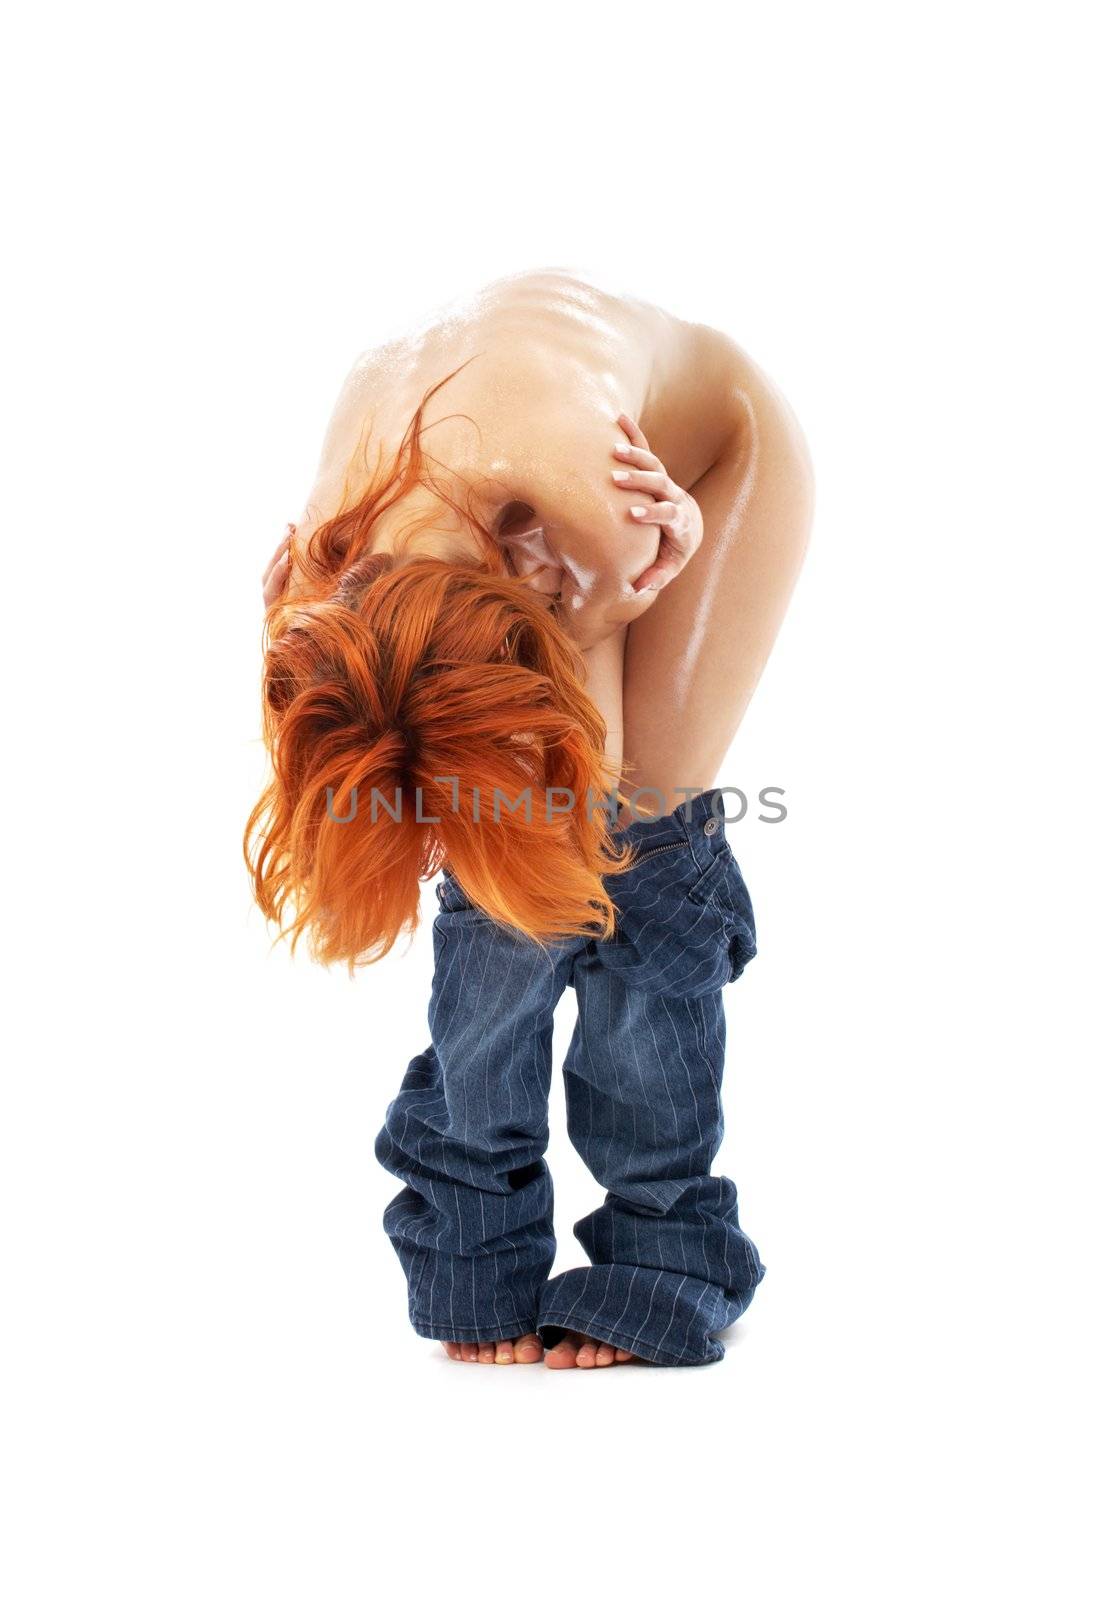 naked redhead in blue jeans over white by dolgachov